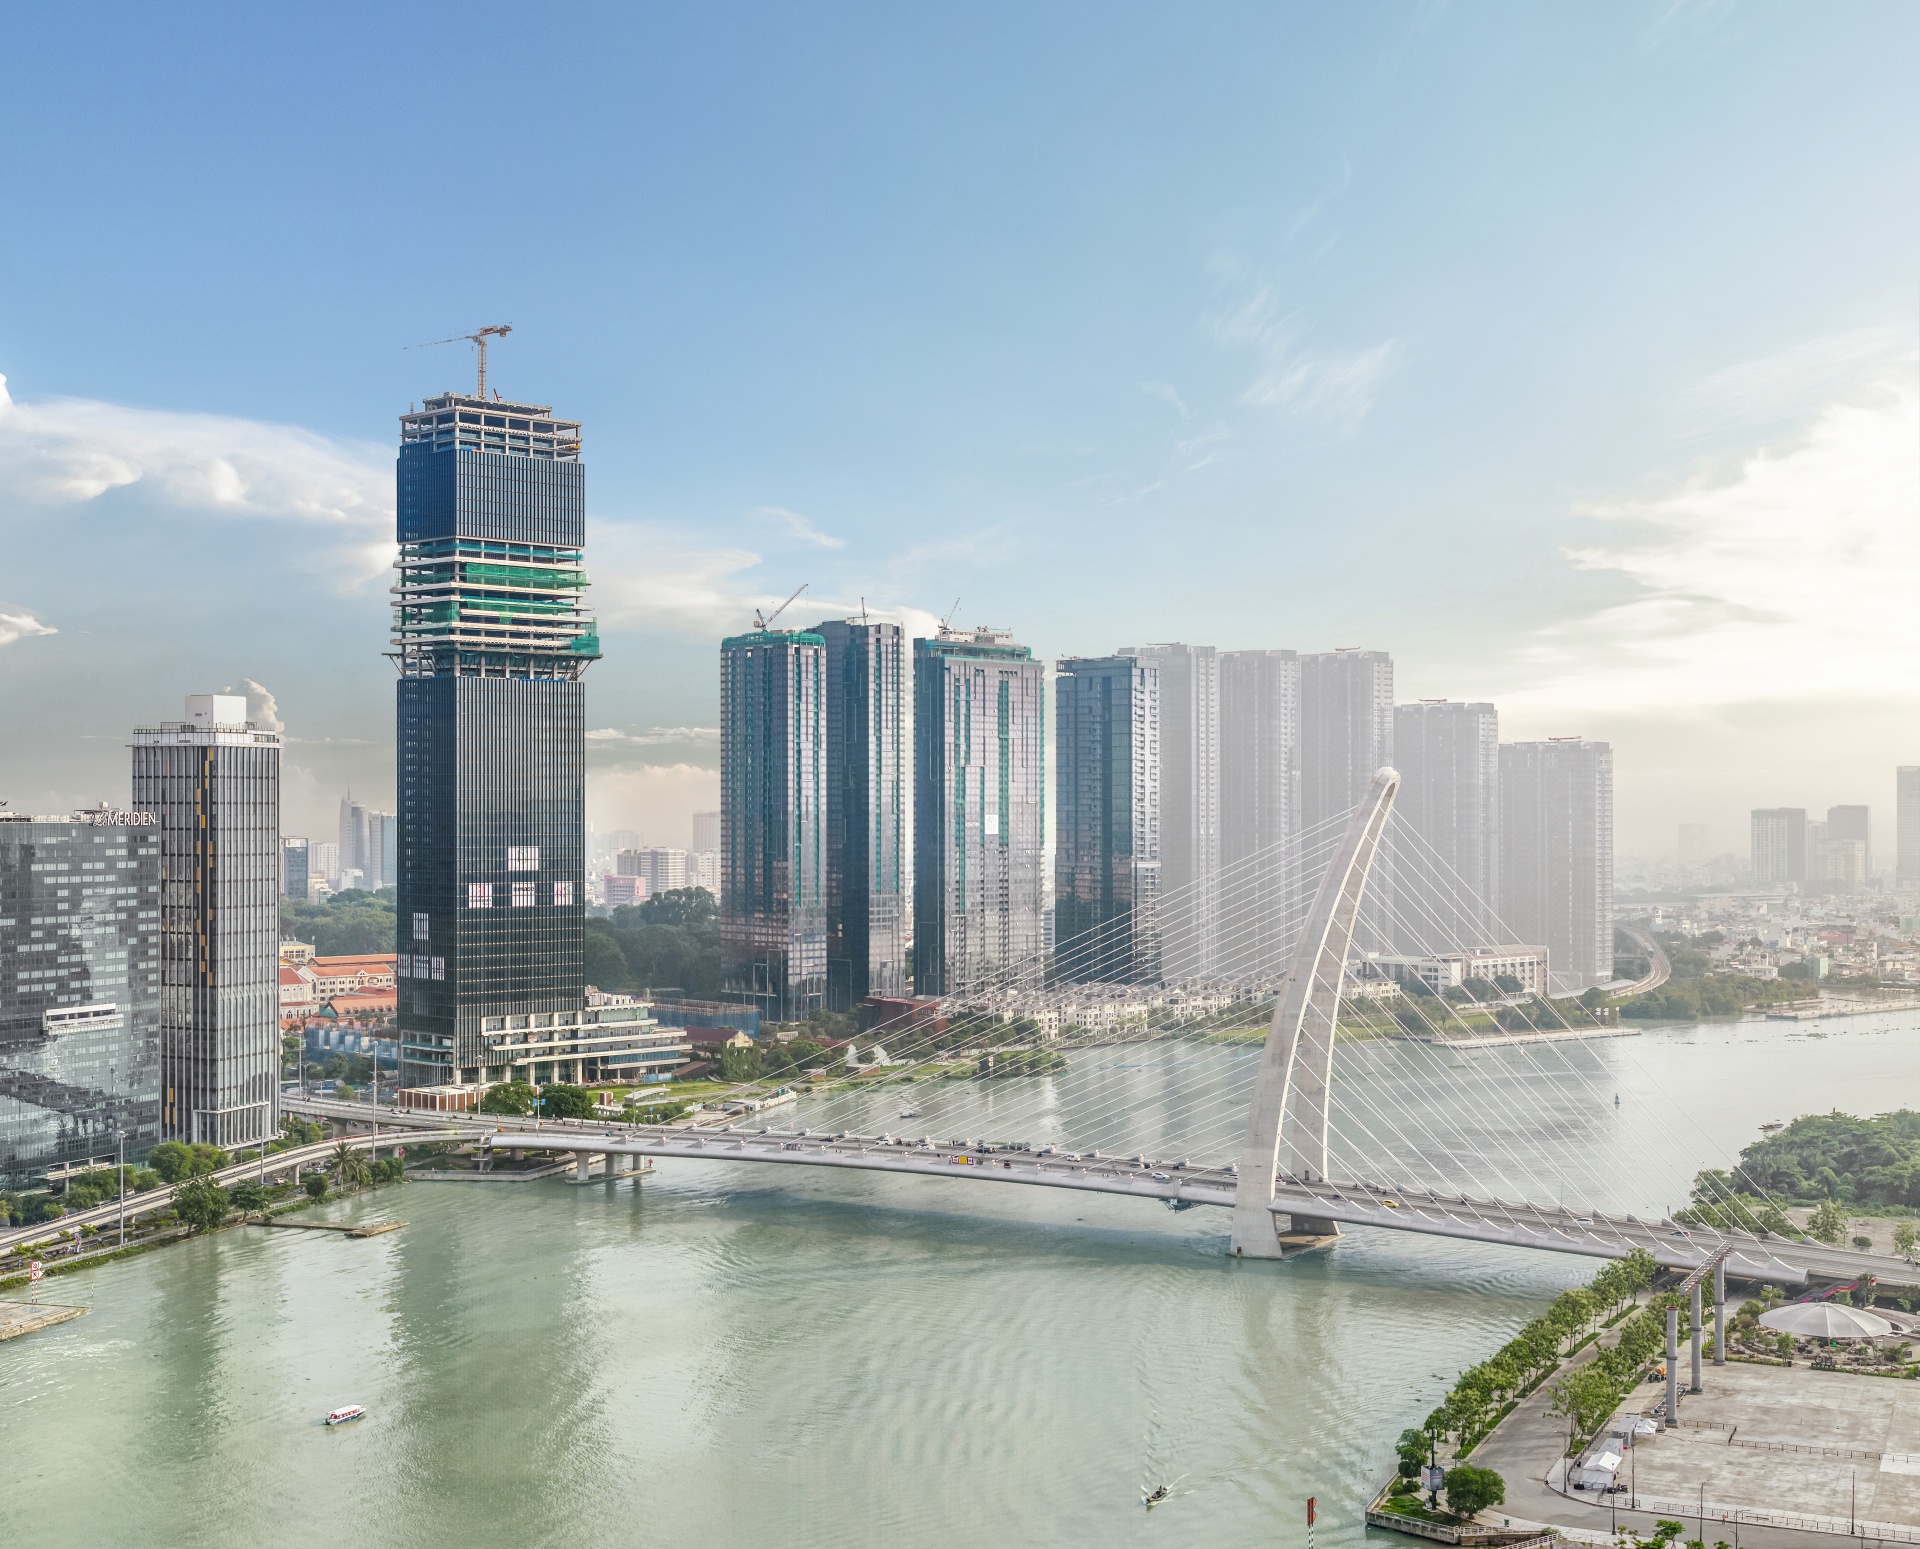 Marriott Residence owners in Grand Marina, Saigon receive ownership certificates